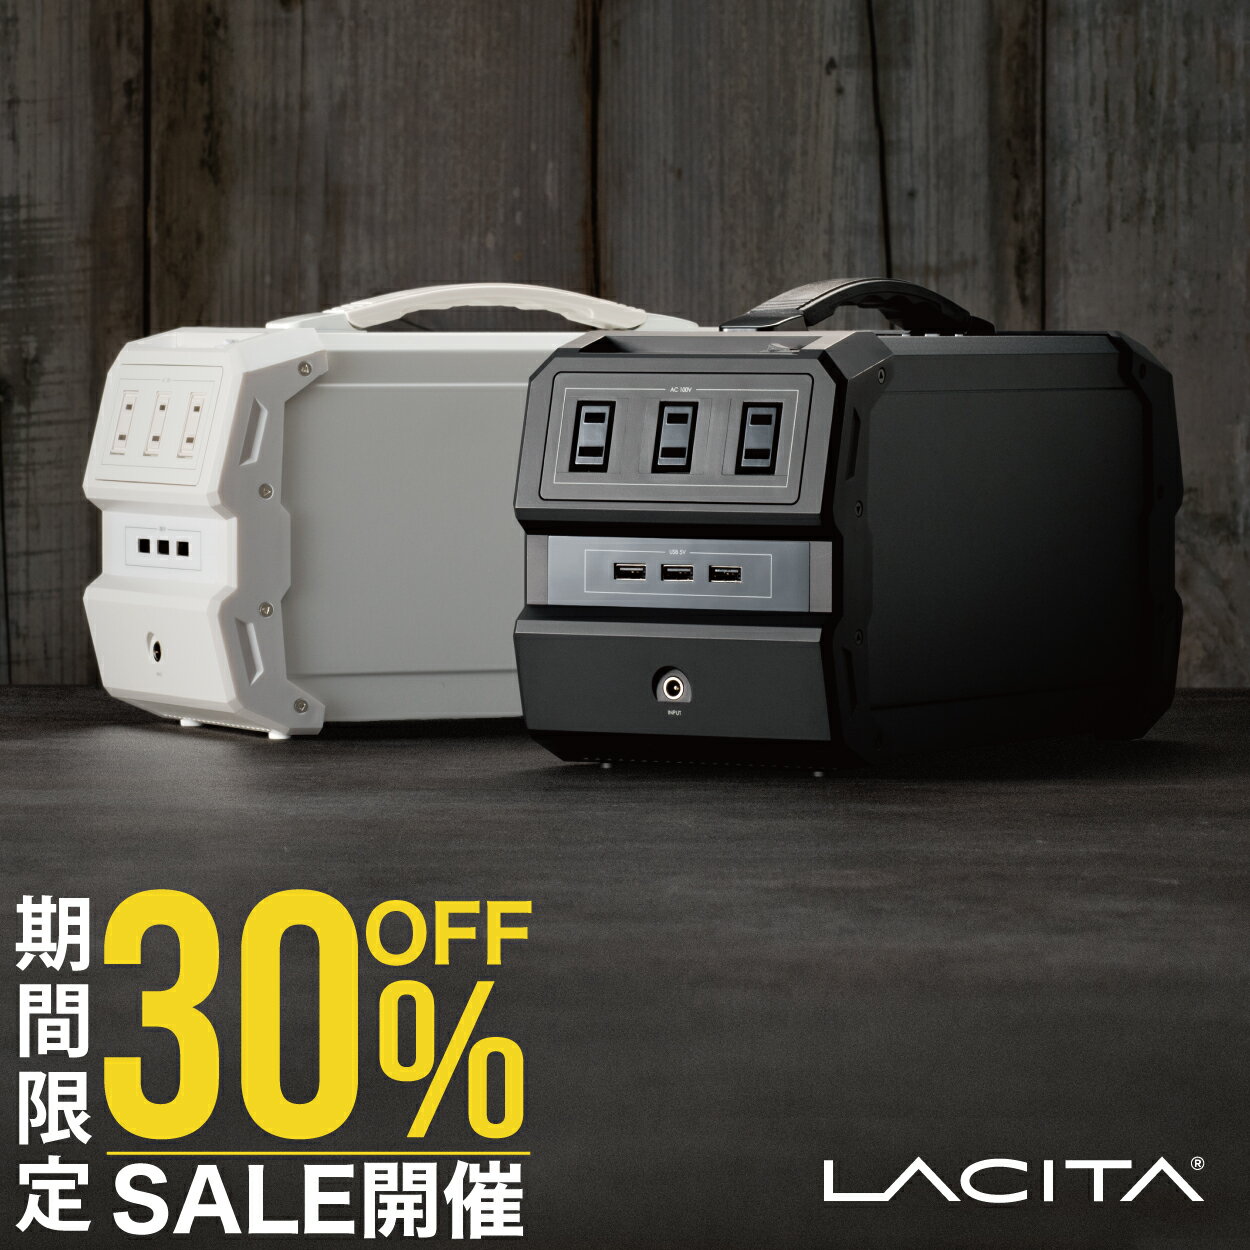 【30%OFFクーポン配布 マラソン期間限定】ポータブル電源 大容量 車中泊 正弦波 エナーボックス 444Wh 120000mAh 400W |ポータブル バッテリー 蓄電器 発電機 小型 <strong>蓄電池</strong> 家庭 静音 ソーラー ソーラーパネル 電気毛布 キャンプ 防災 電源